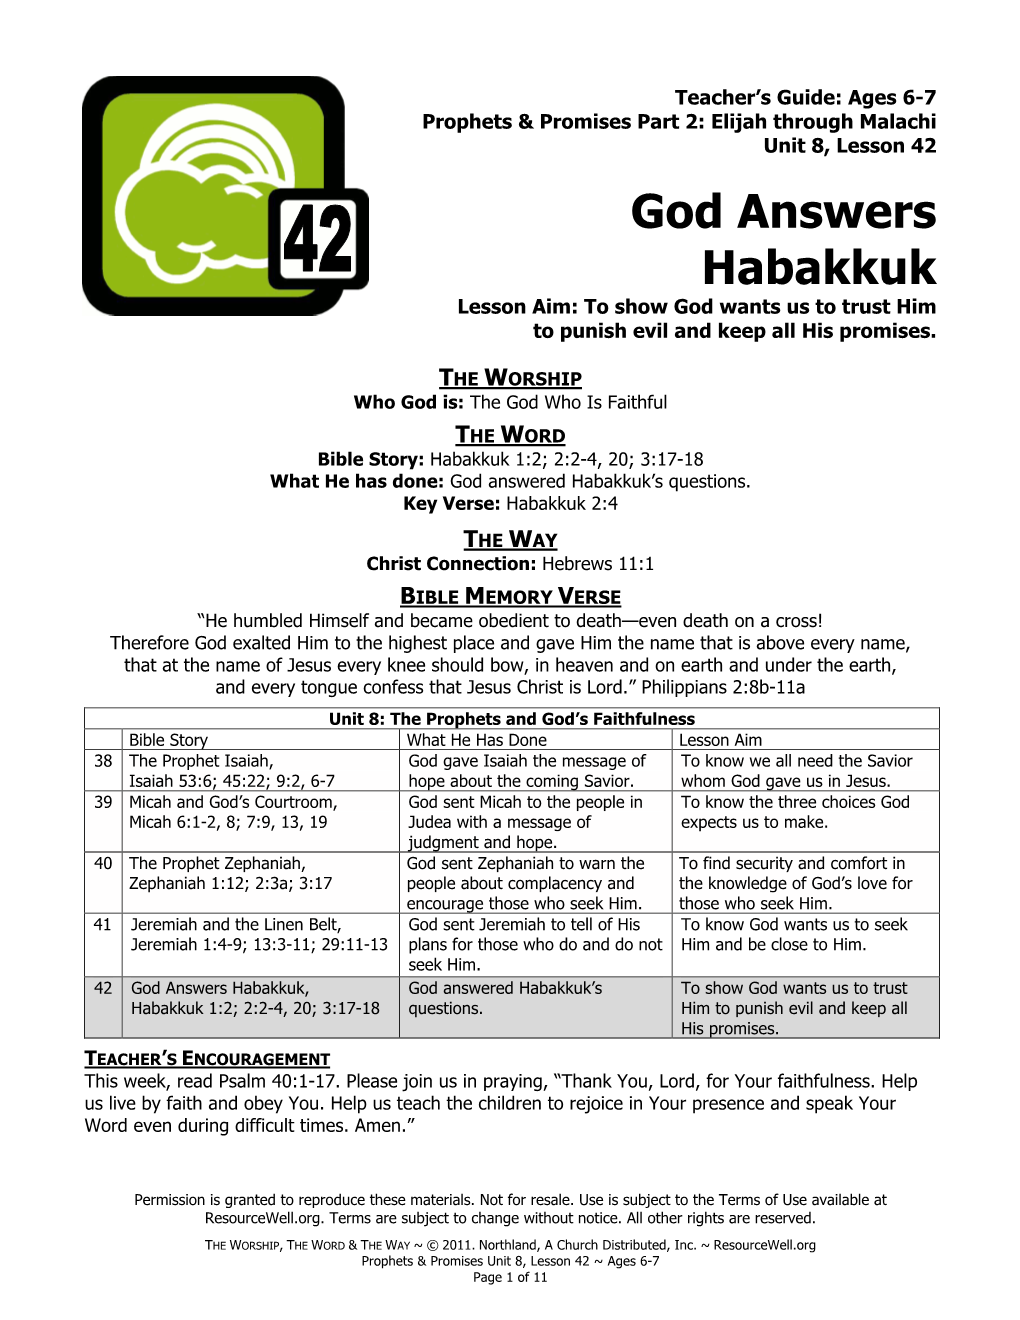 God Answers Habakkuk Lesson Aim: to Show God Wants Us to Trust Him to Punish Evil and Keep All His Promises